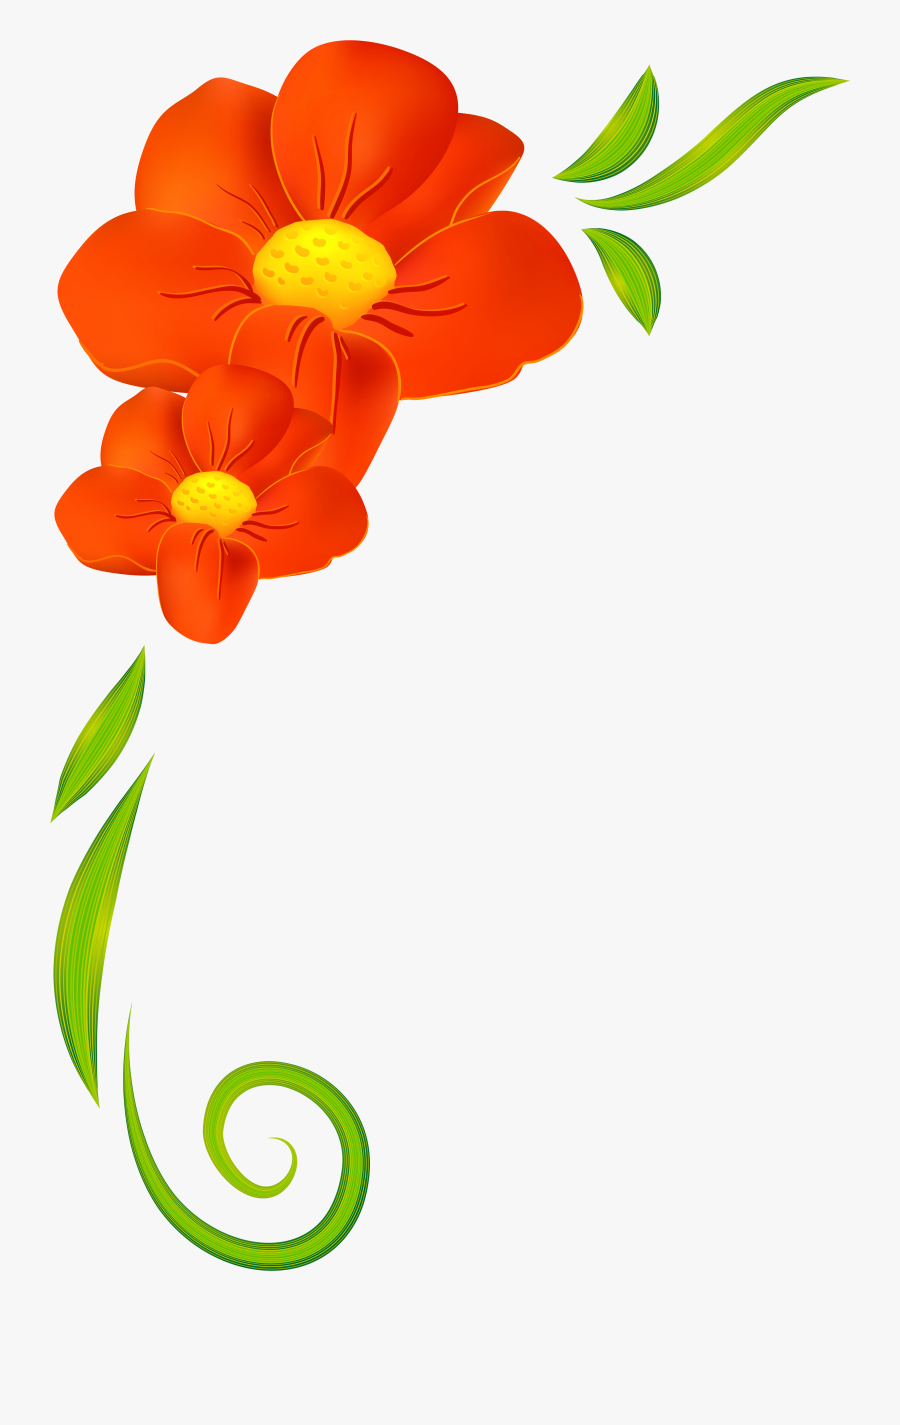 Jpg Royalty Free Download Spring Flowers Clipart - Flower Border Clipart Png, Transparent Clipart